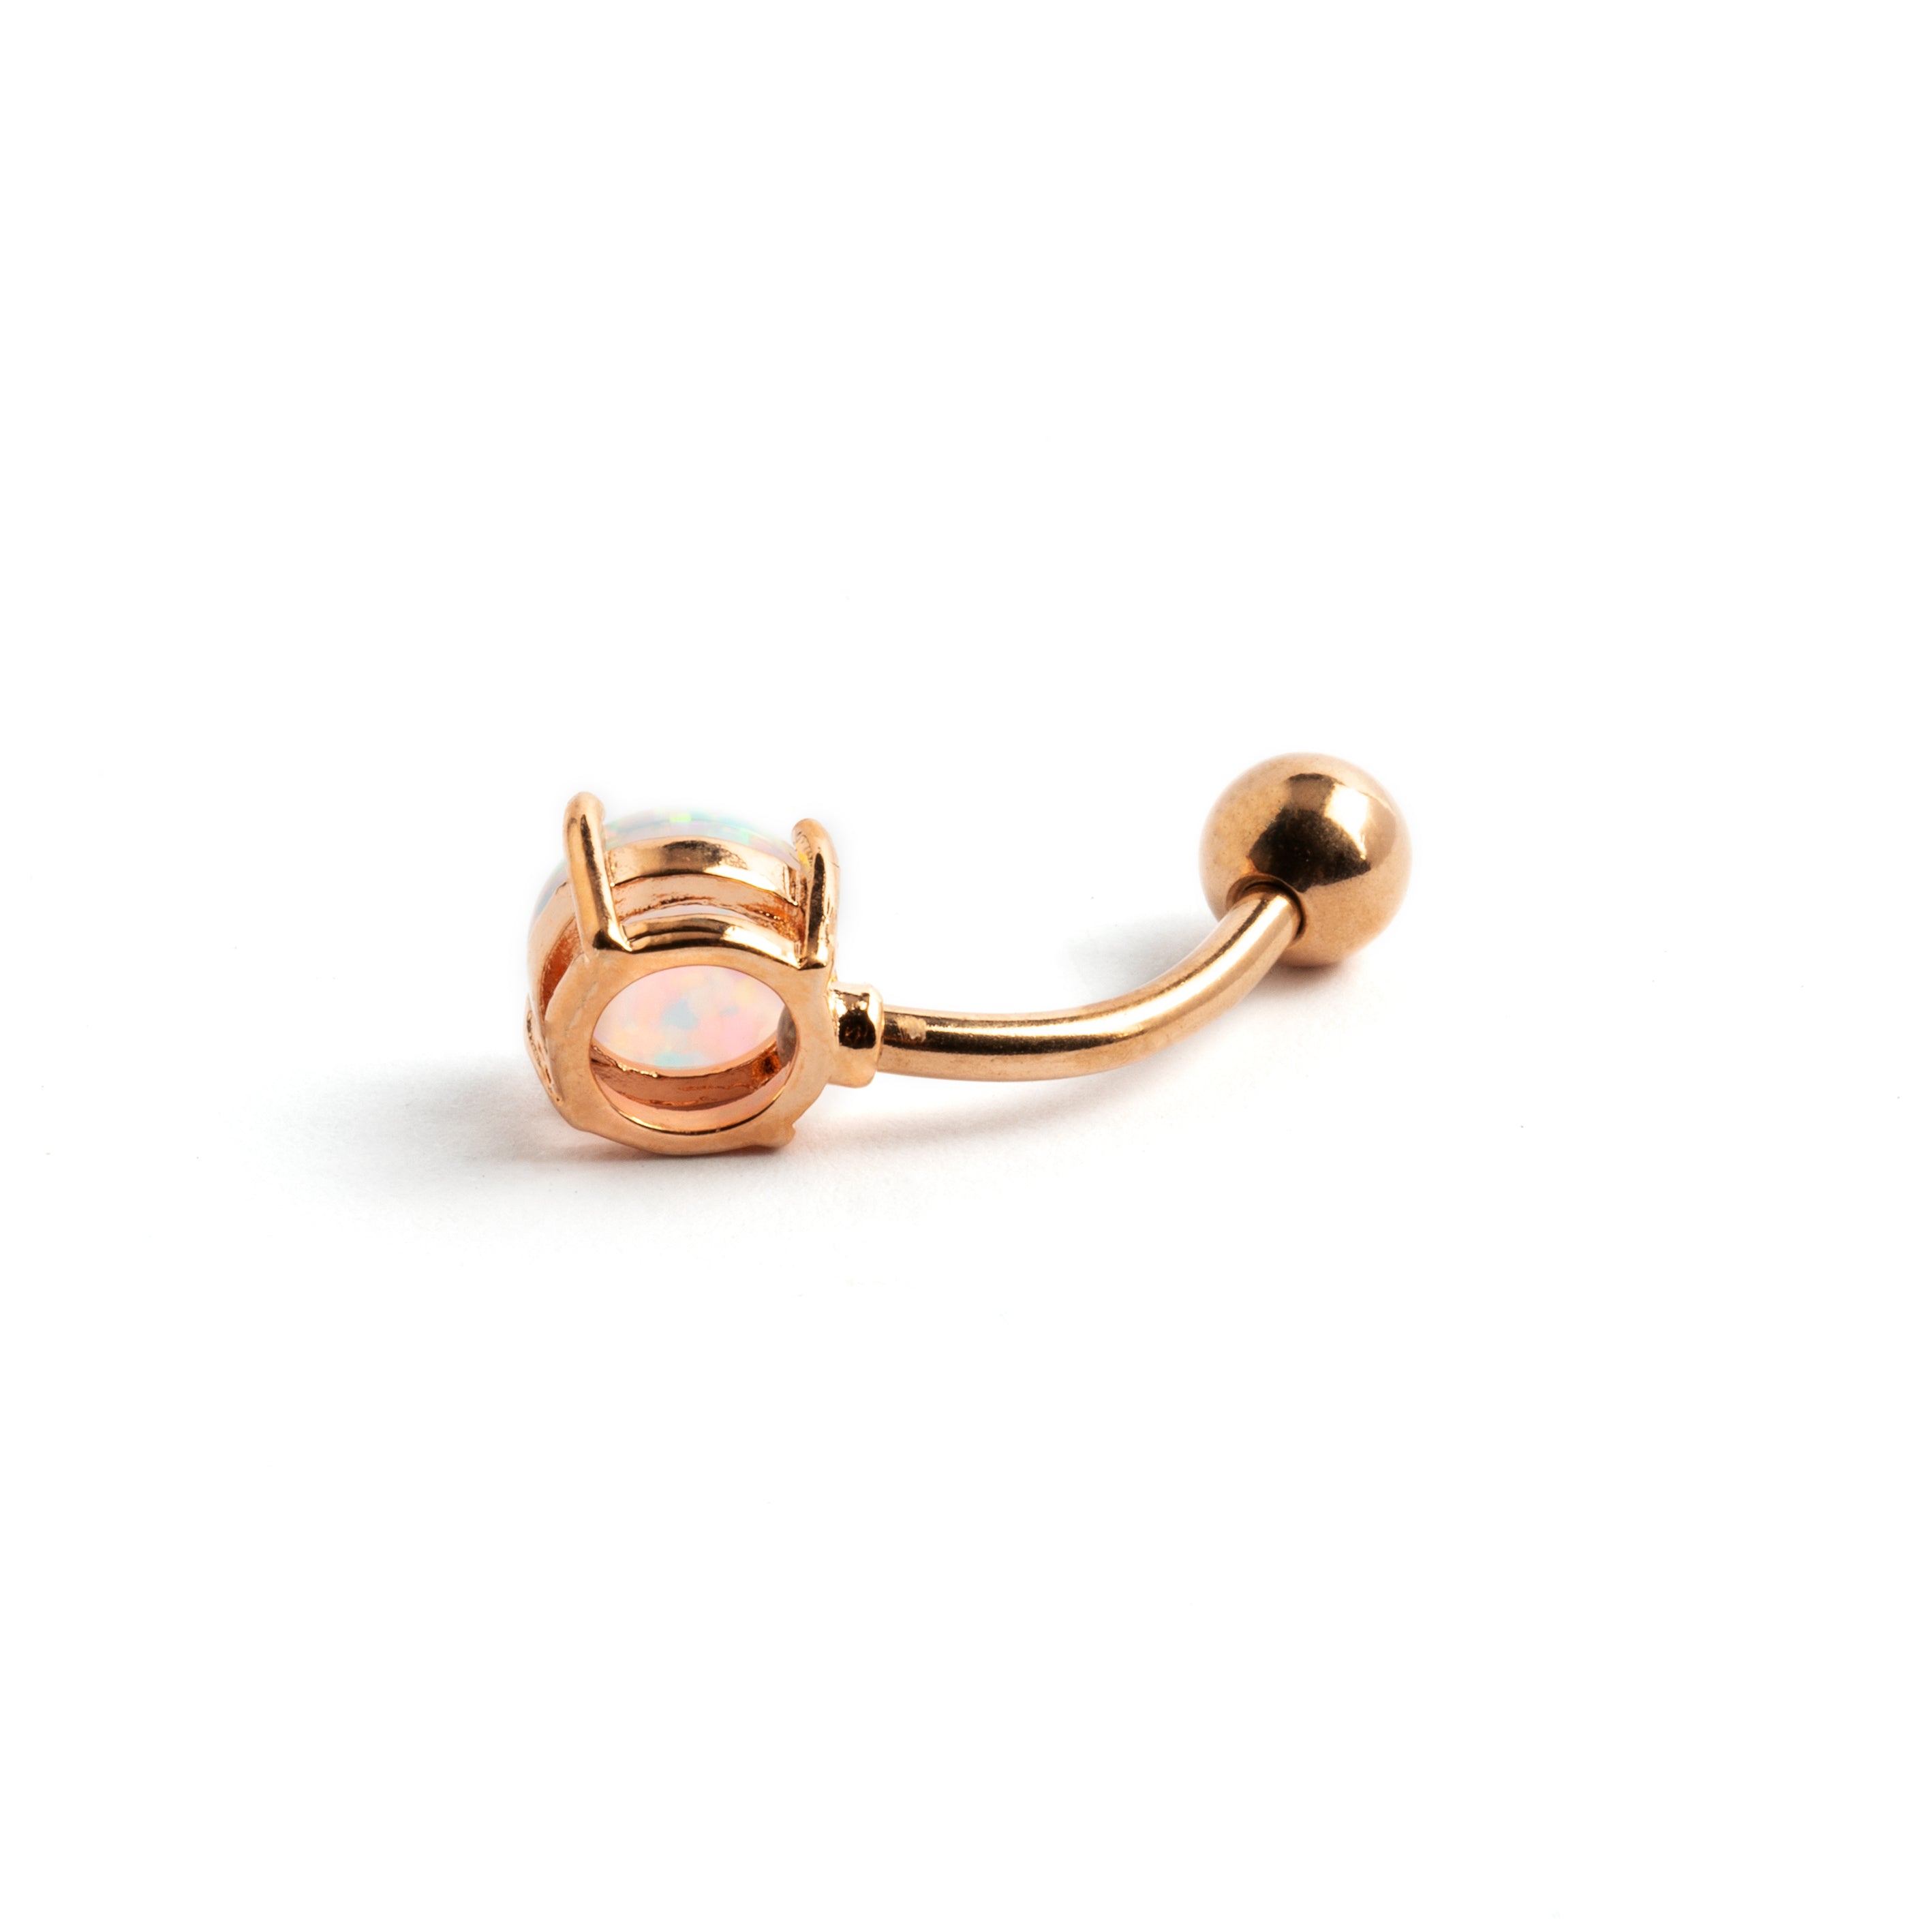 1.6mm/14g Rose Gold plated surgical steel belly button ring with set Opal back view